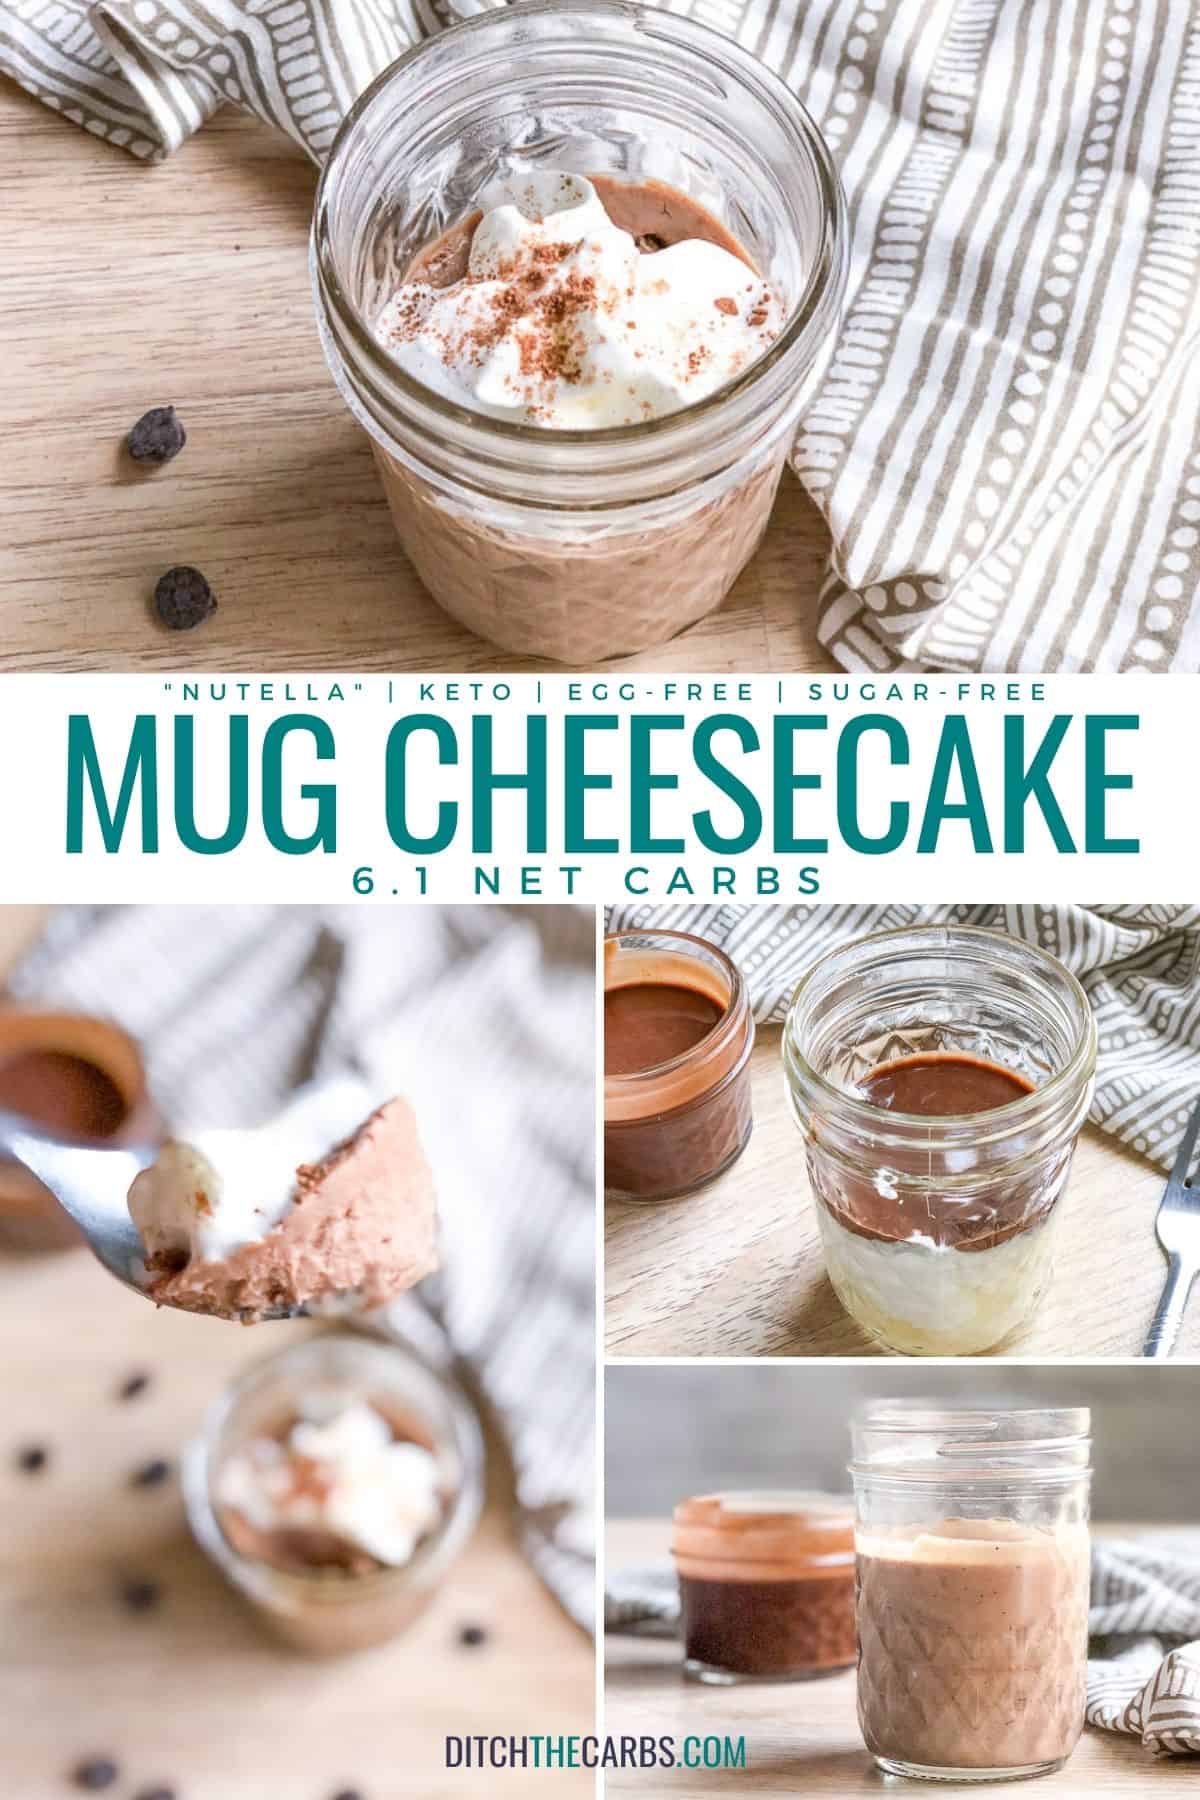 A variety of pictures in a collage show the "Nutella" keto mug cheesecake being made. The individual pictures are included through the article.